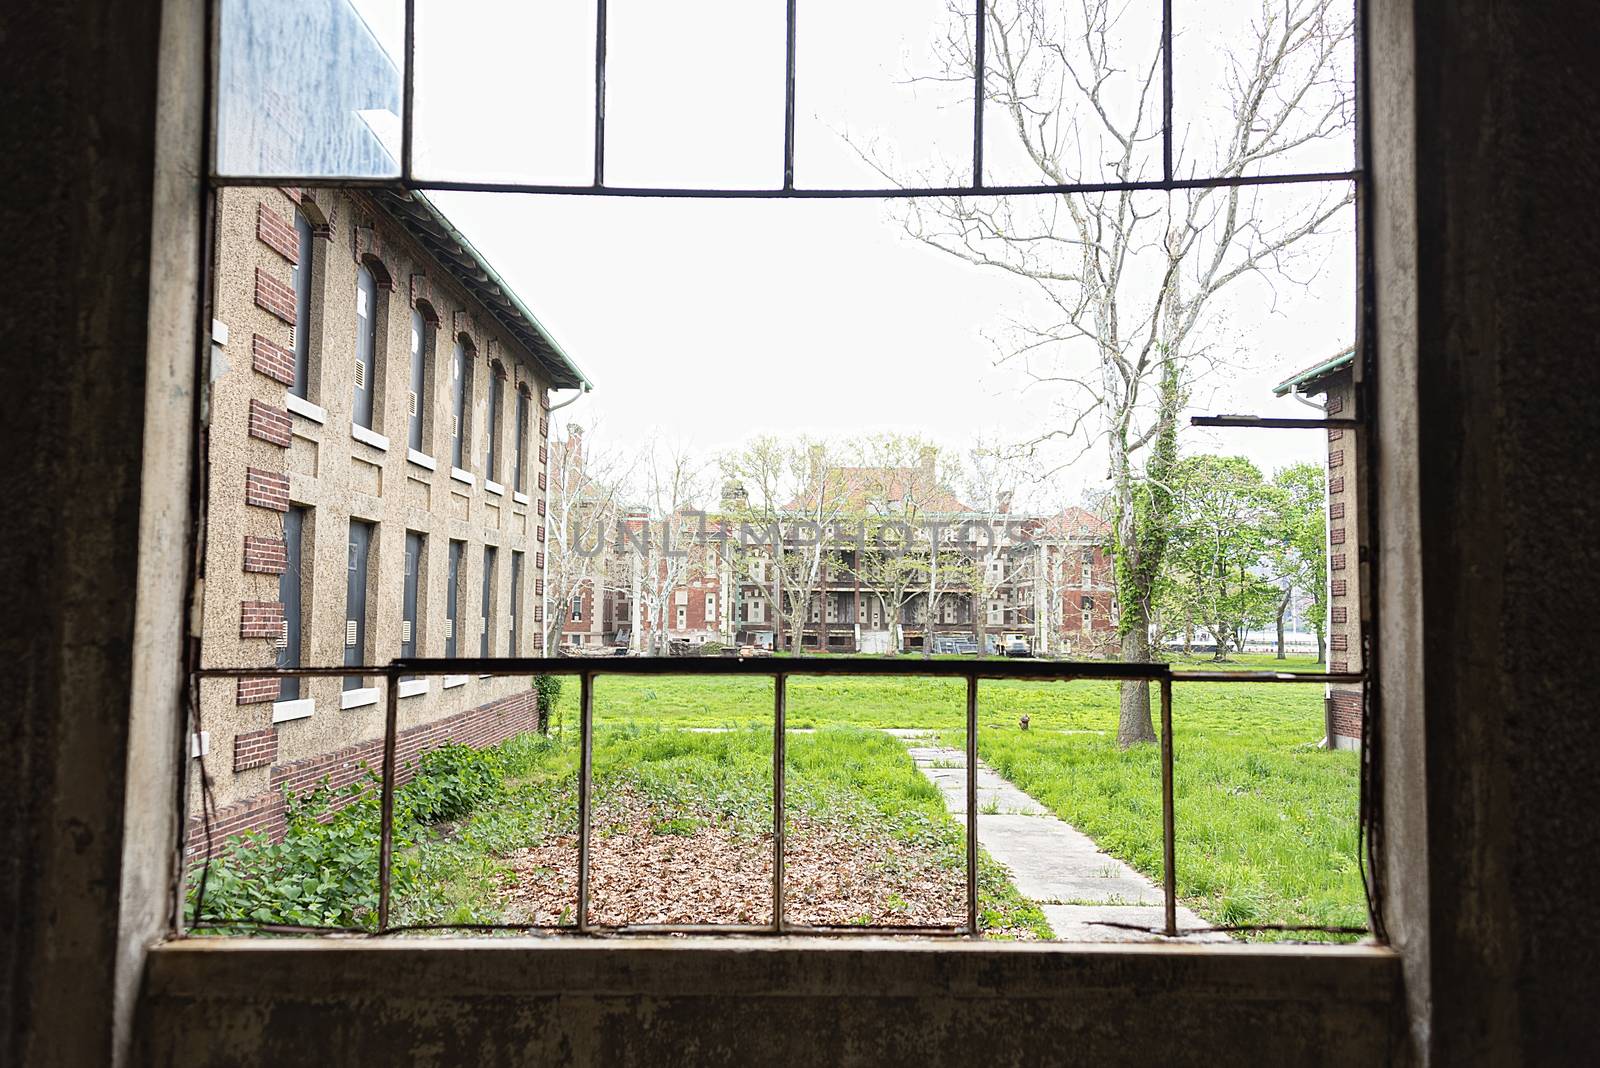 USA, New York, Ellis Island - May 2019: View across the campus of the hospital wings at the Immigration centre